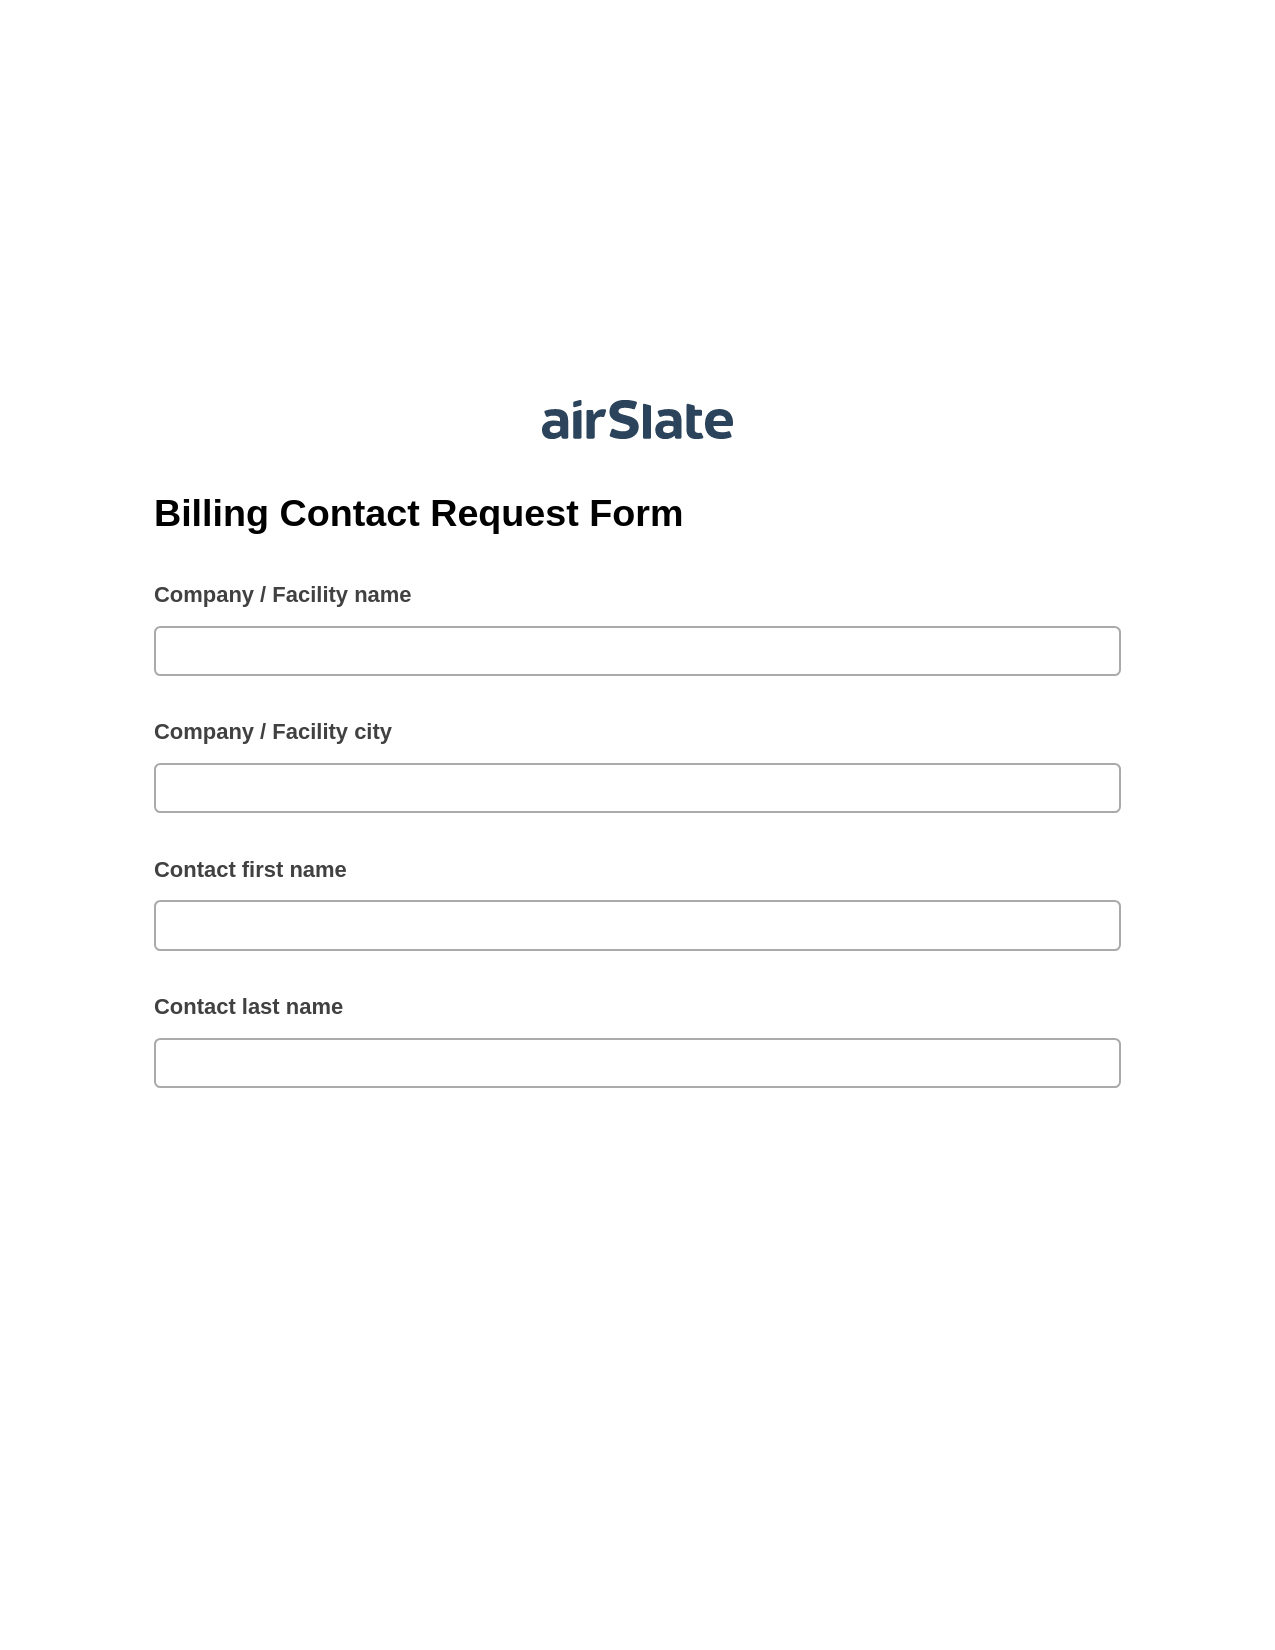 Multirole Billing Contact Request Form Pre-fill Dropdowns from CSV File Bot, Document Hide Bot, Export to MySQL Bot